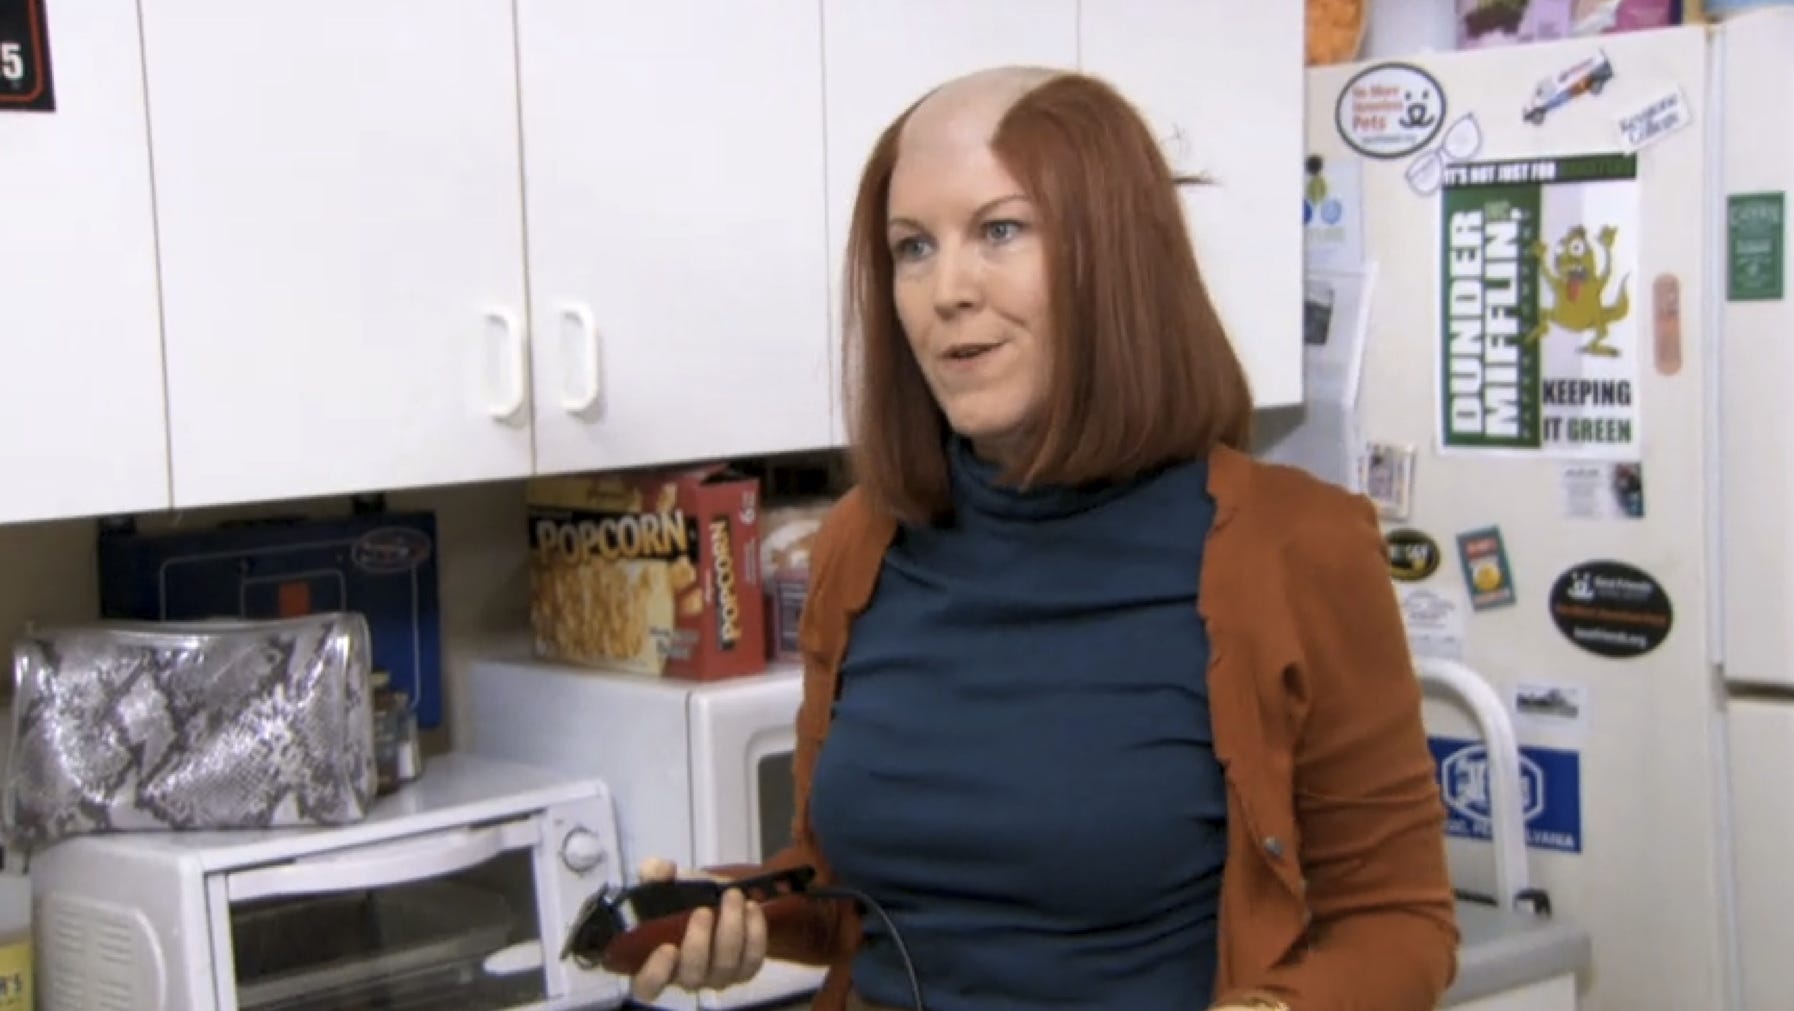 Last night's TV: Kate Flannery rocked 'The Office'